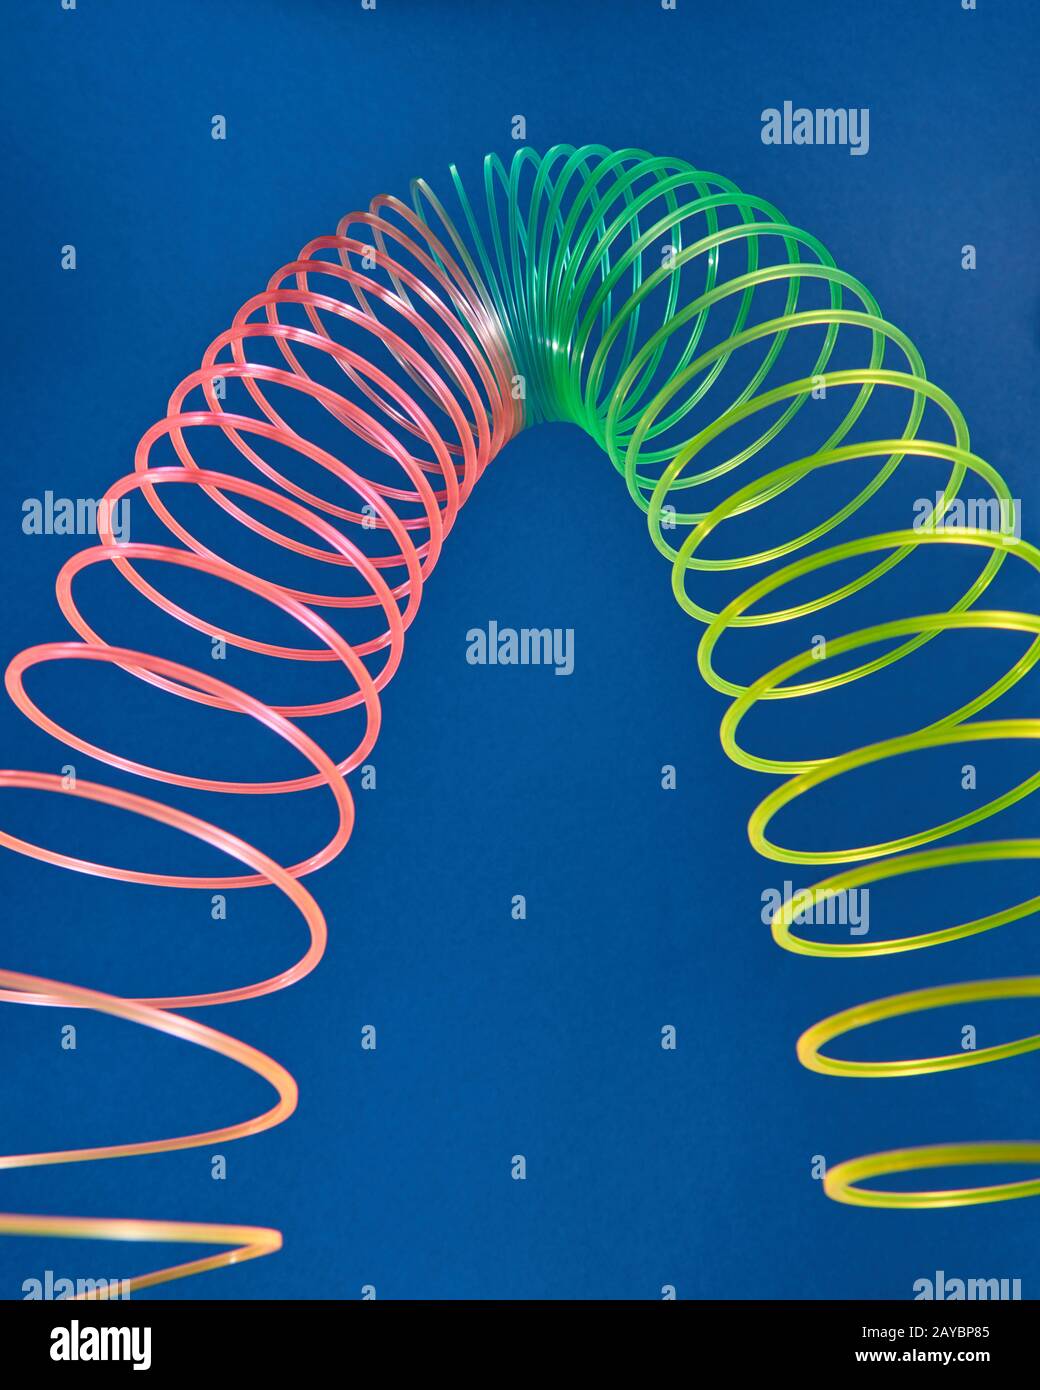 Stretching slinky toy in the shape of parabola. Stock Photo